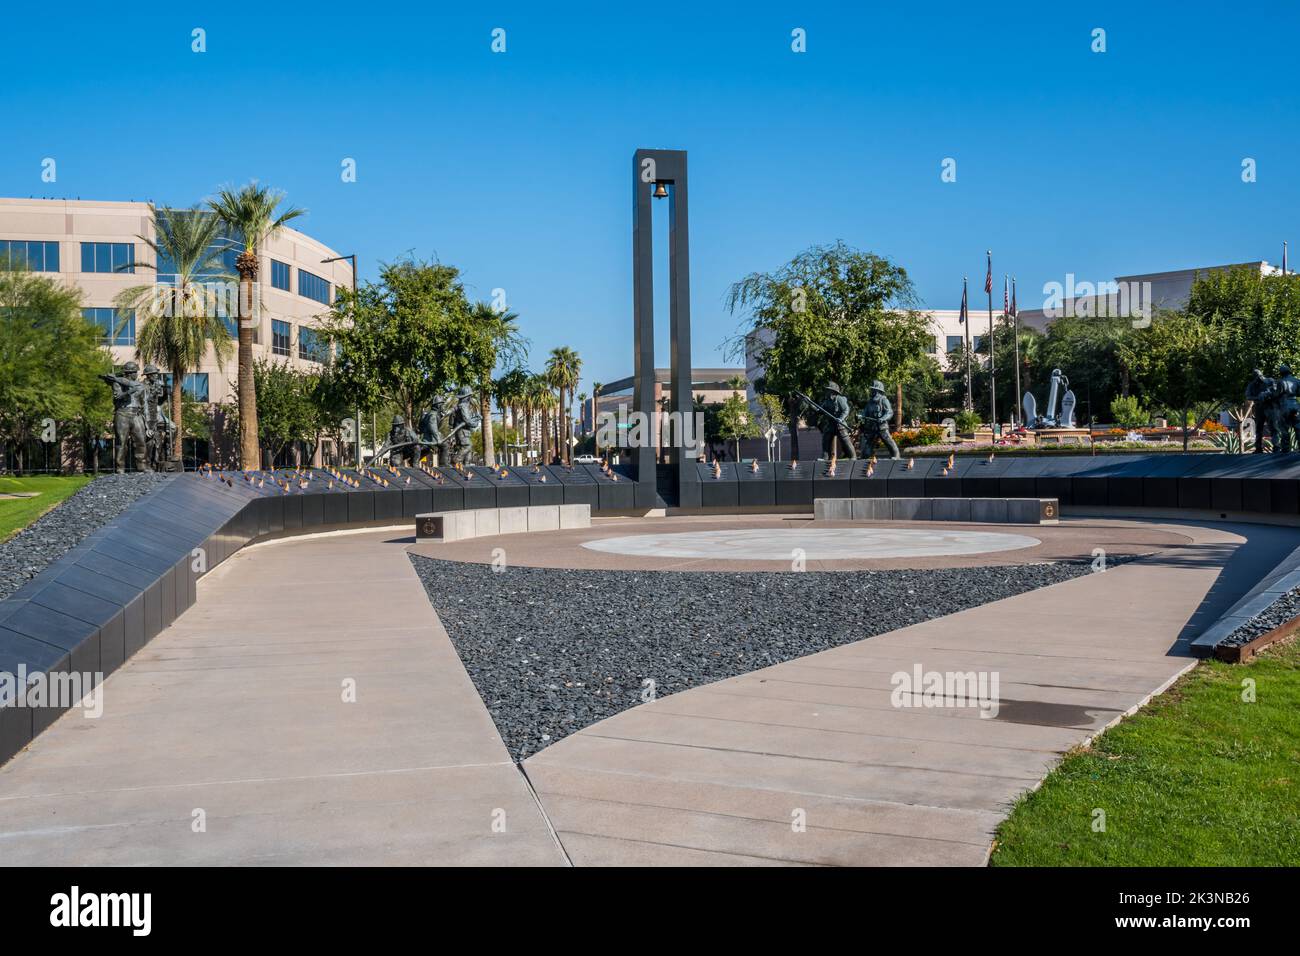 A colossal sculpture group of undying valor in Phoenix, Arizona Stock Photo